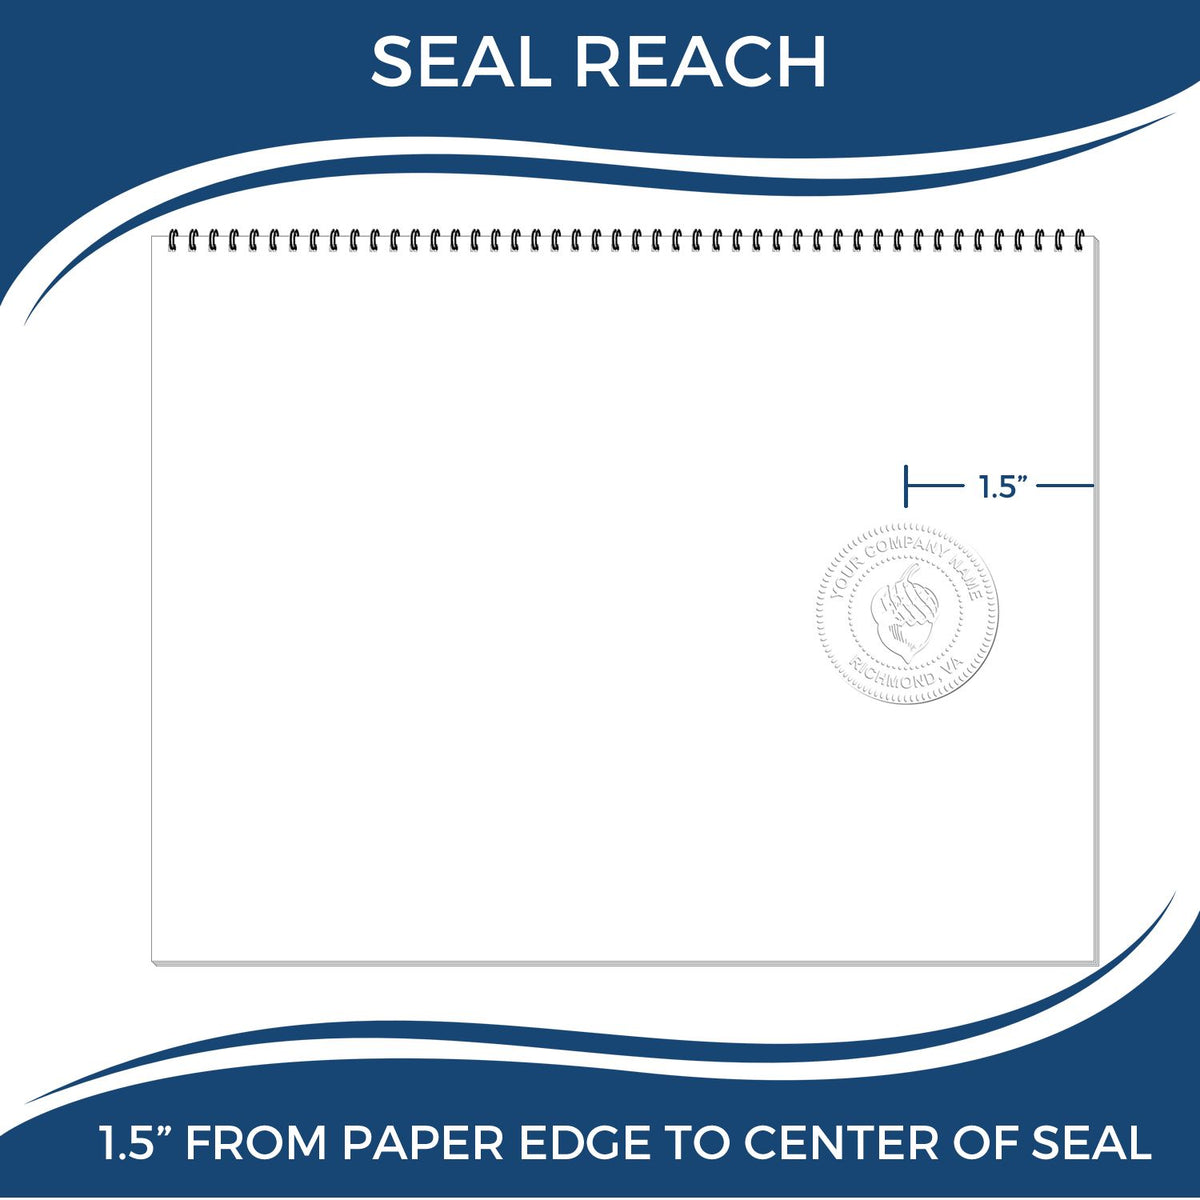 An infographic showing the seal reach which is represented by a ruler and a miniature seal image of the Hybrid Oklahoma Architect Seal